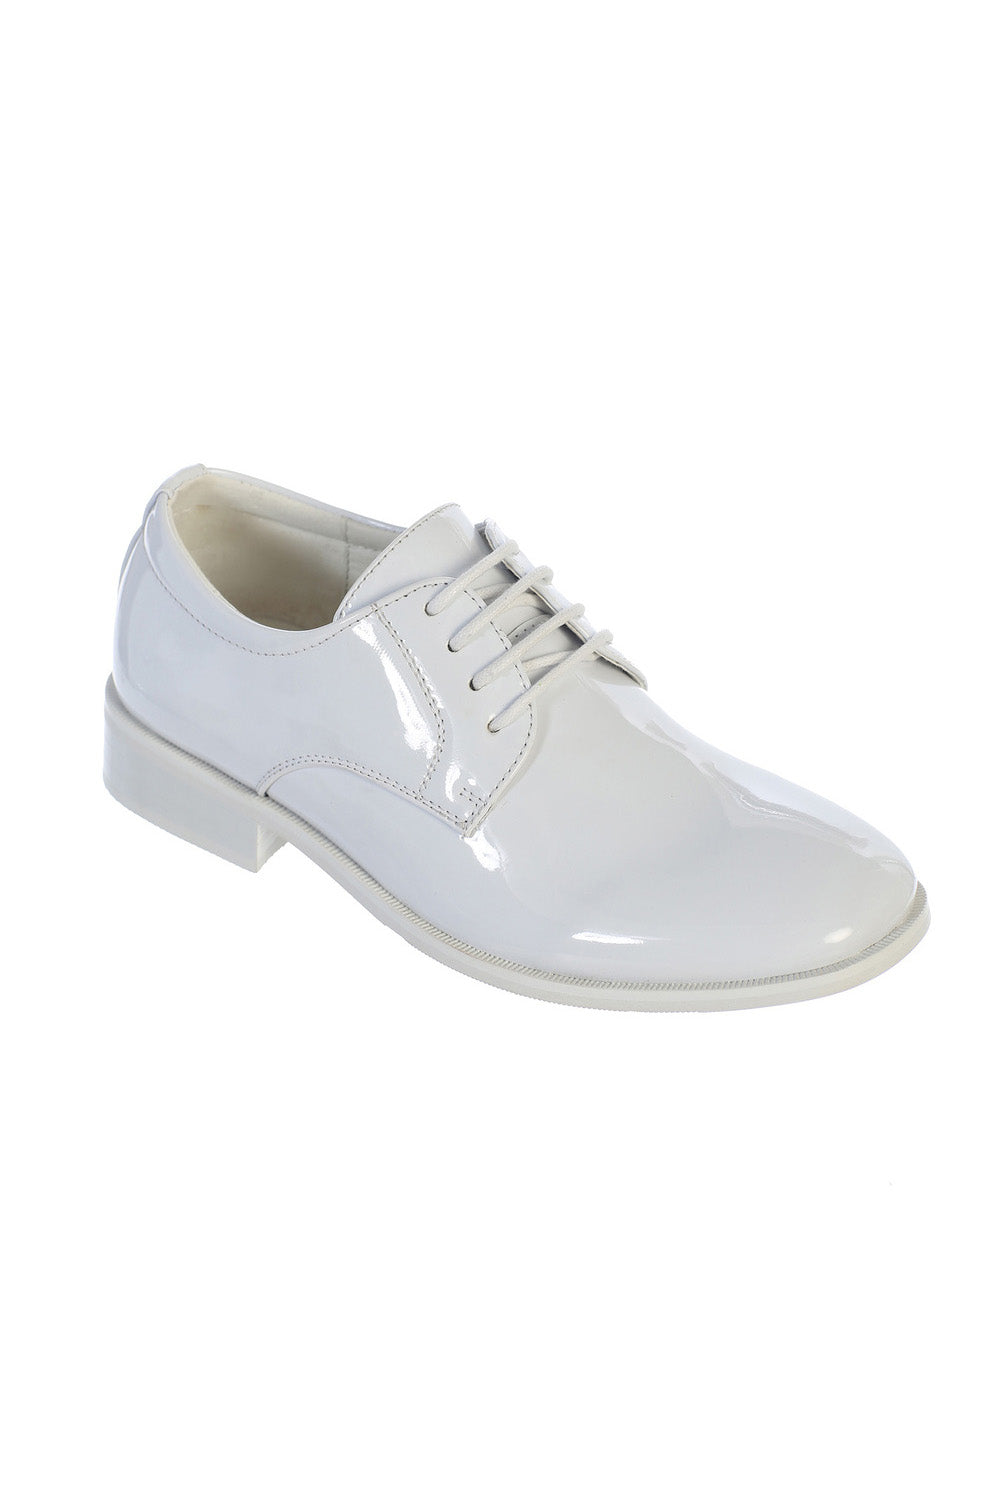 shoes for kids white